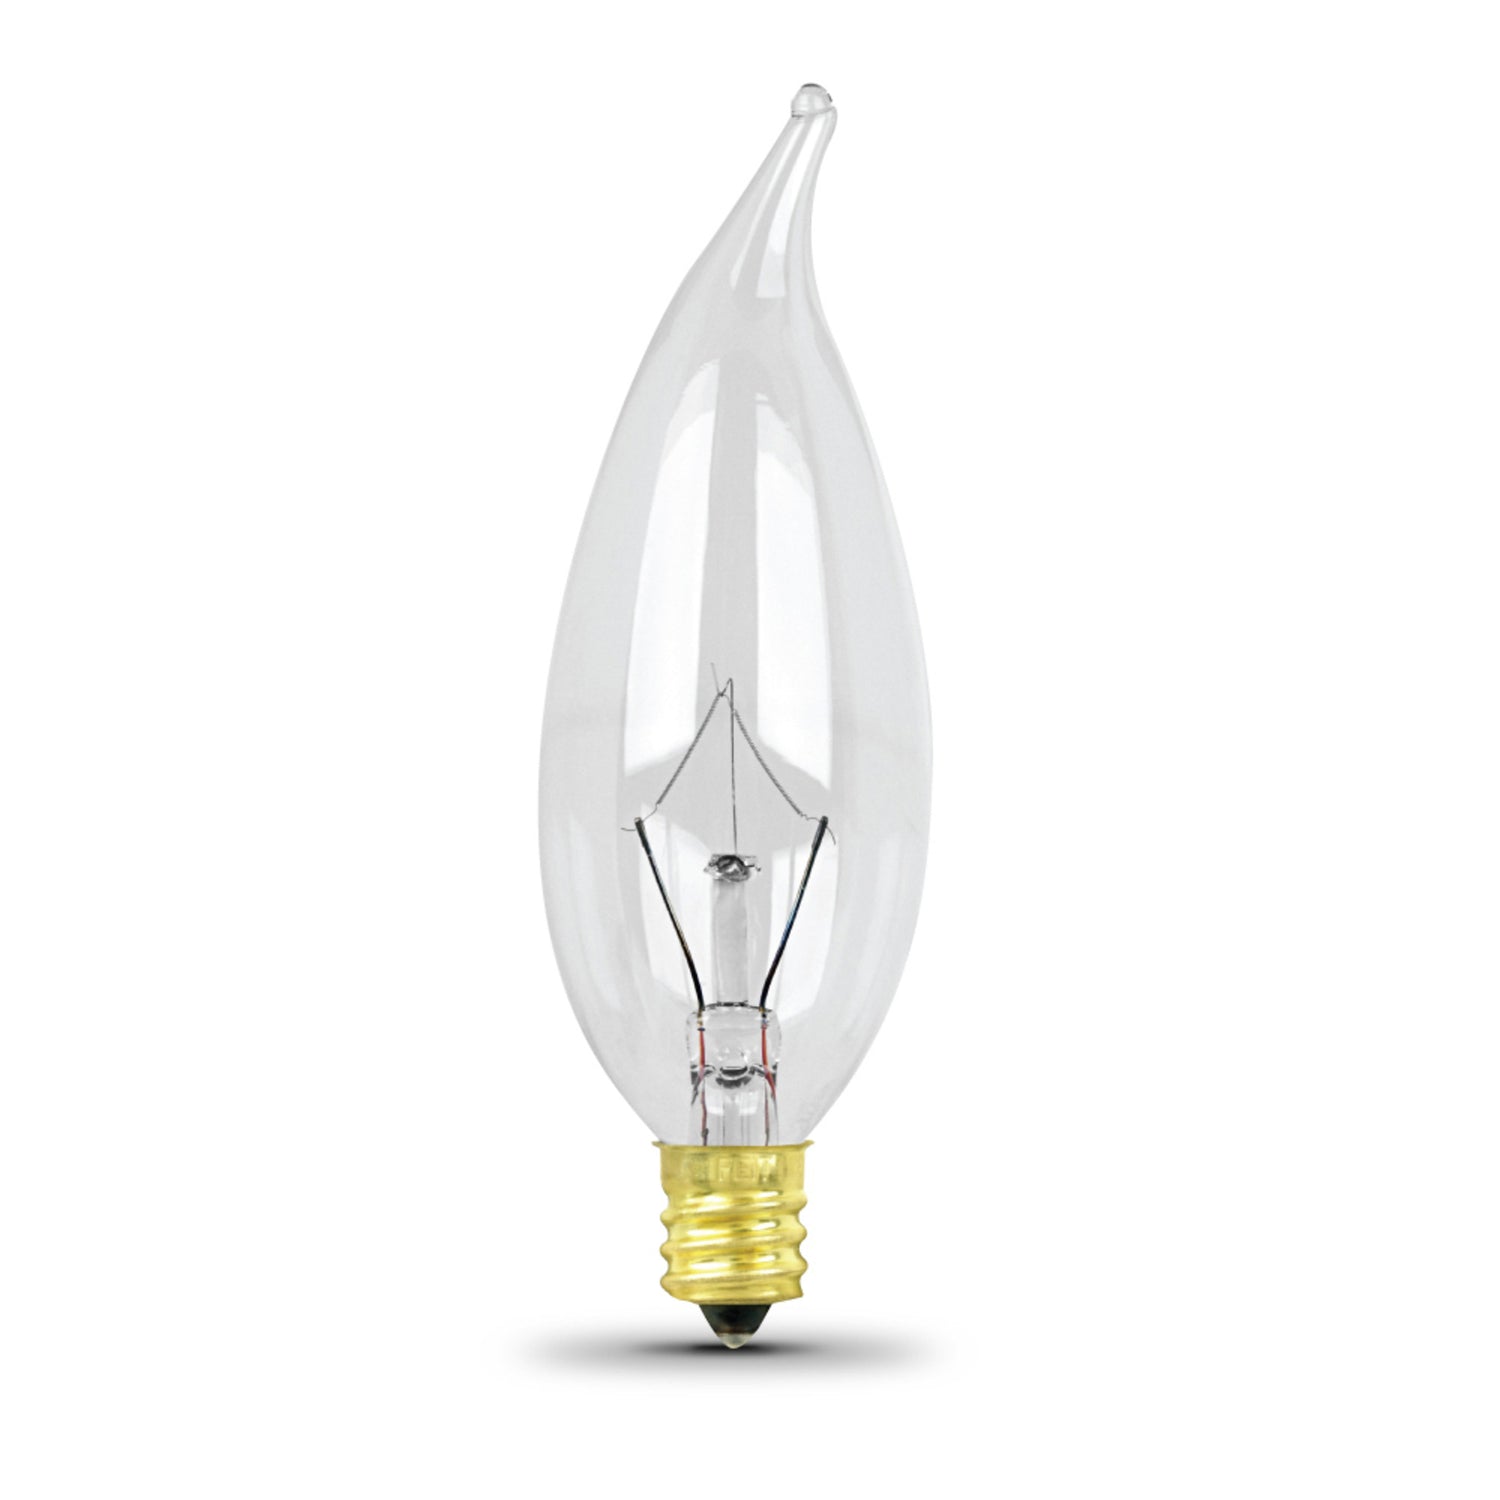 25W Soft White (2700K) Clear Flame Tip Chandelier Dimmable Incandescent Light Bulb